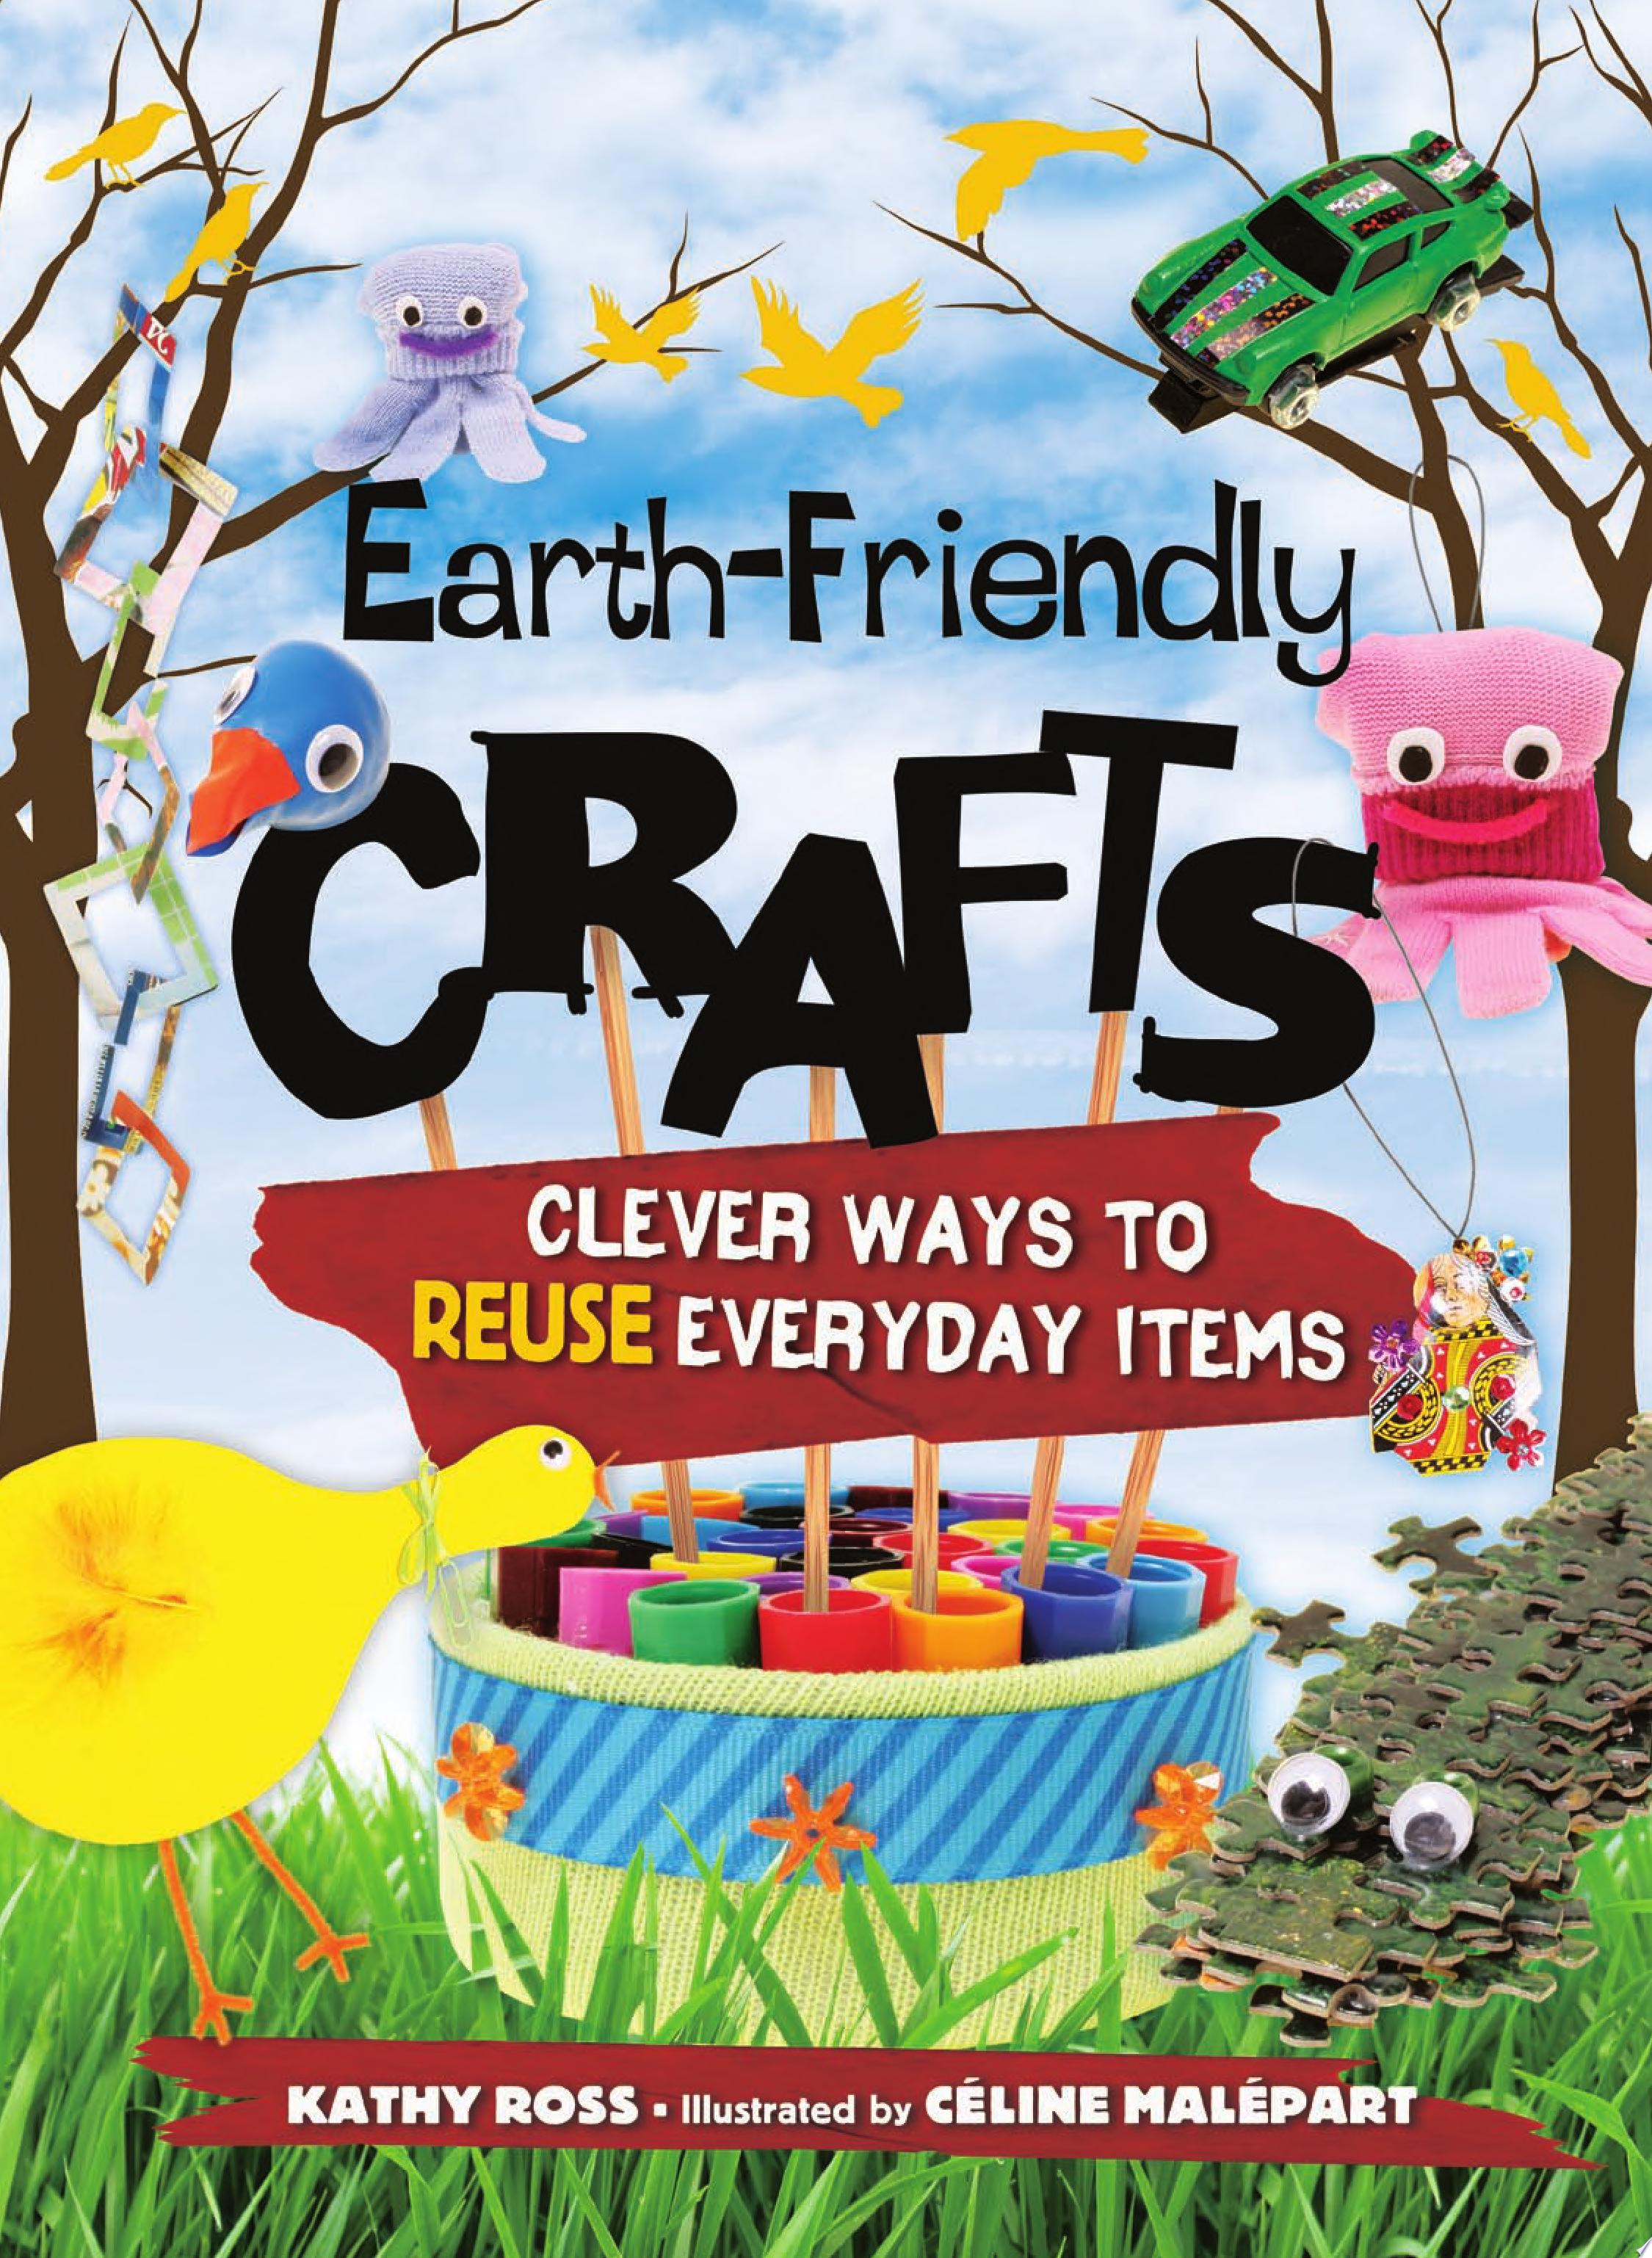 Image for "Earth-Friendly Crafts"